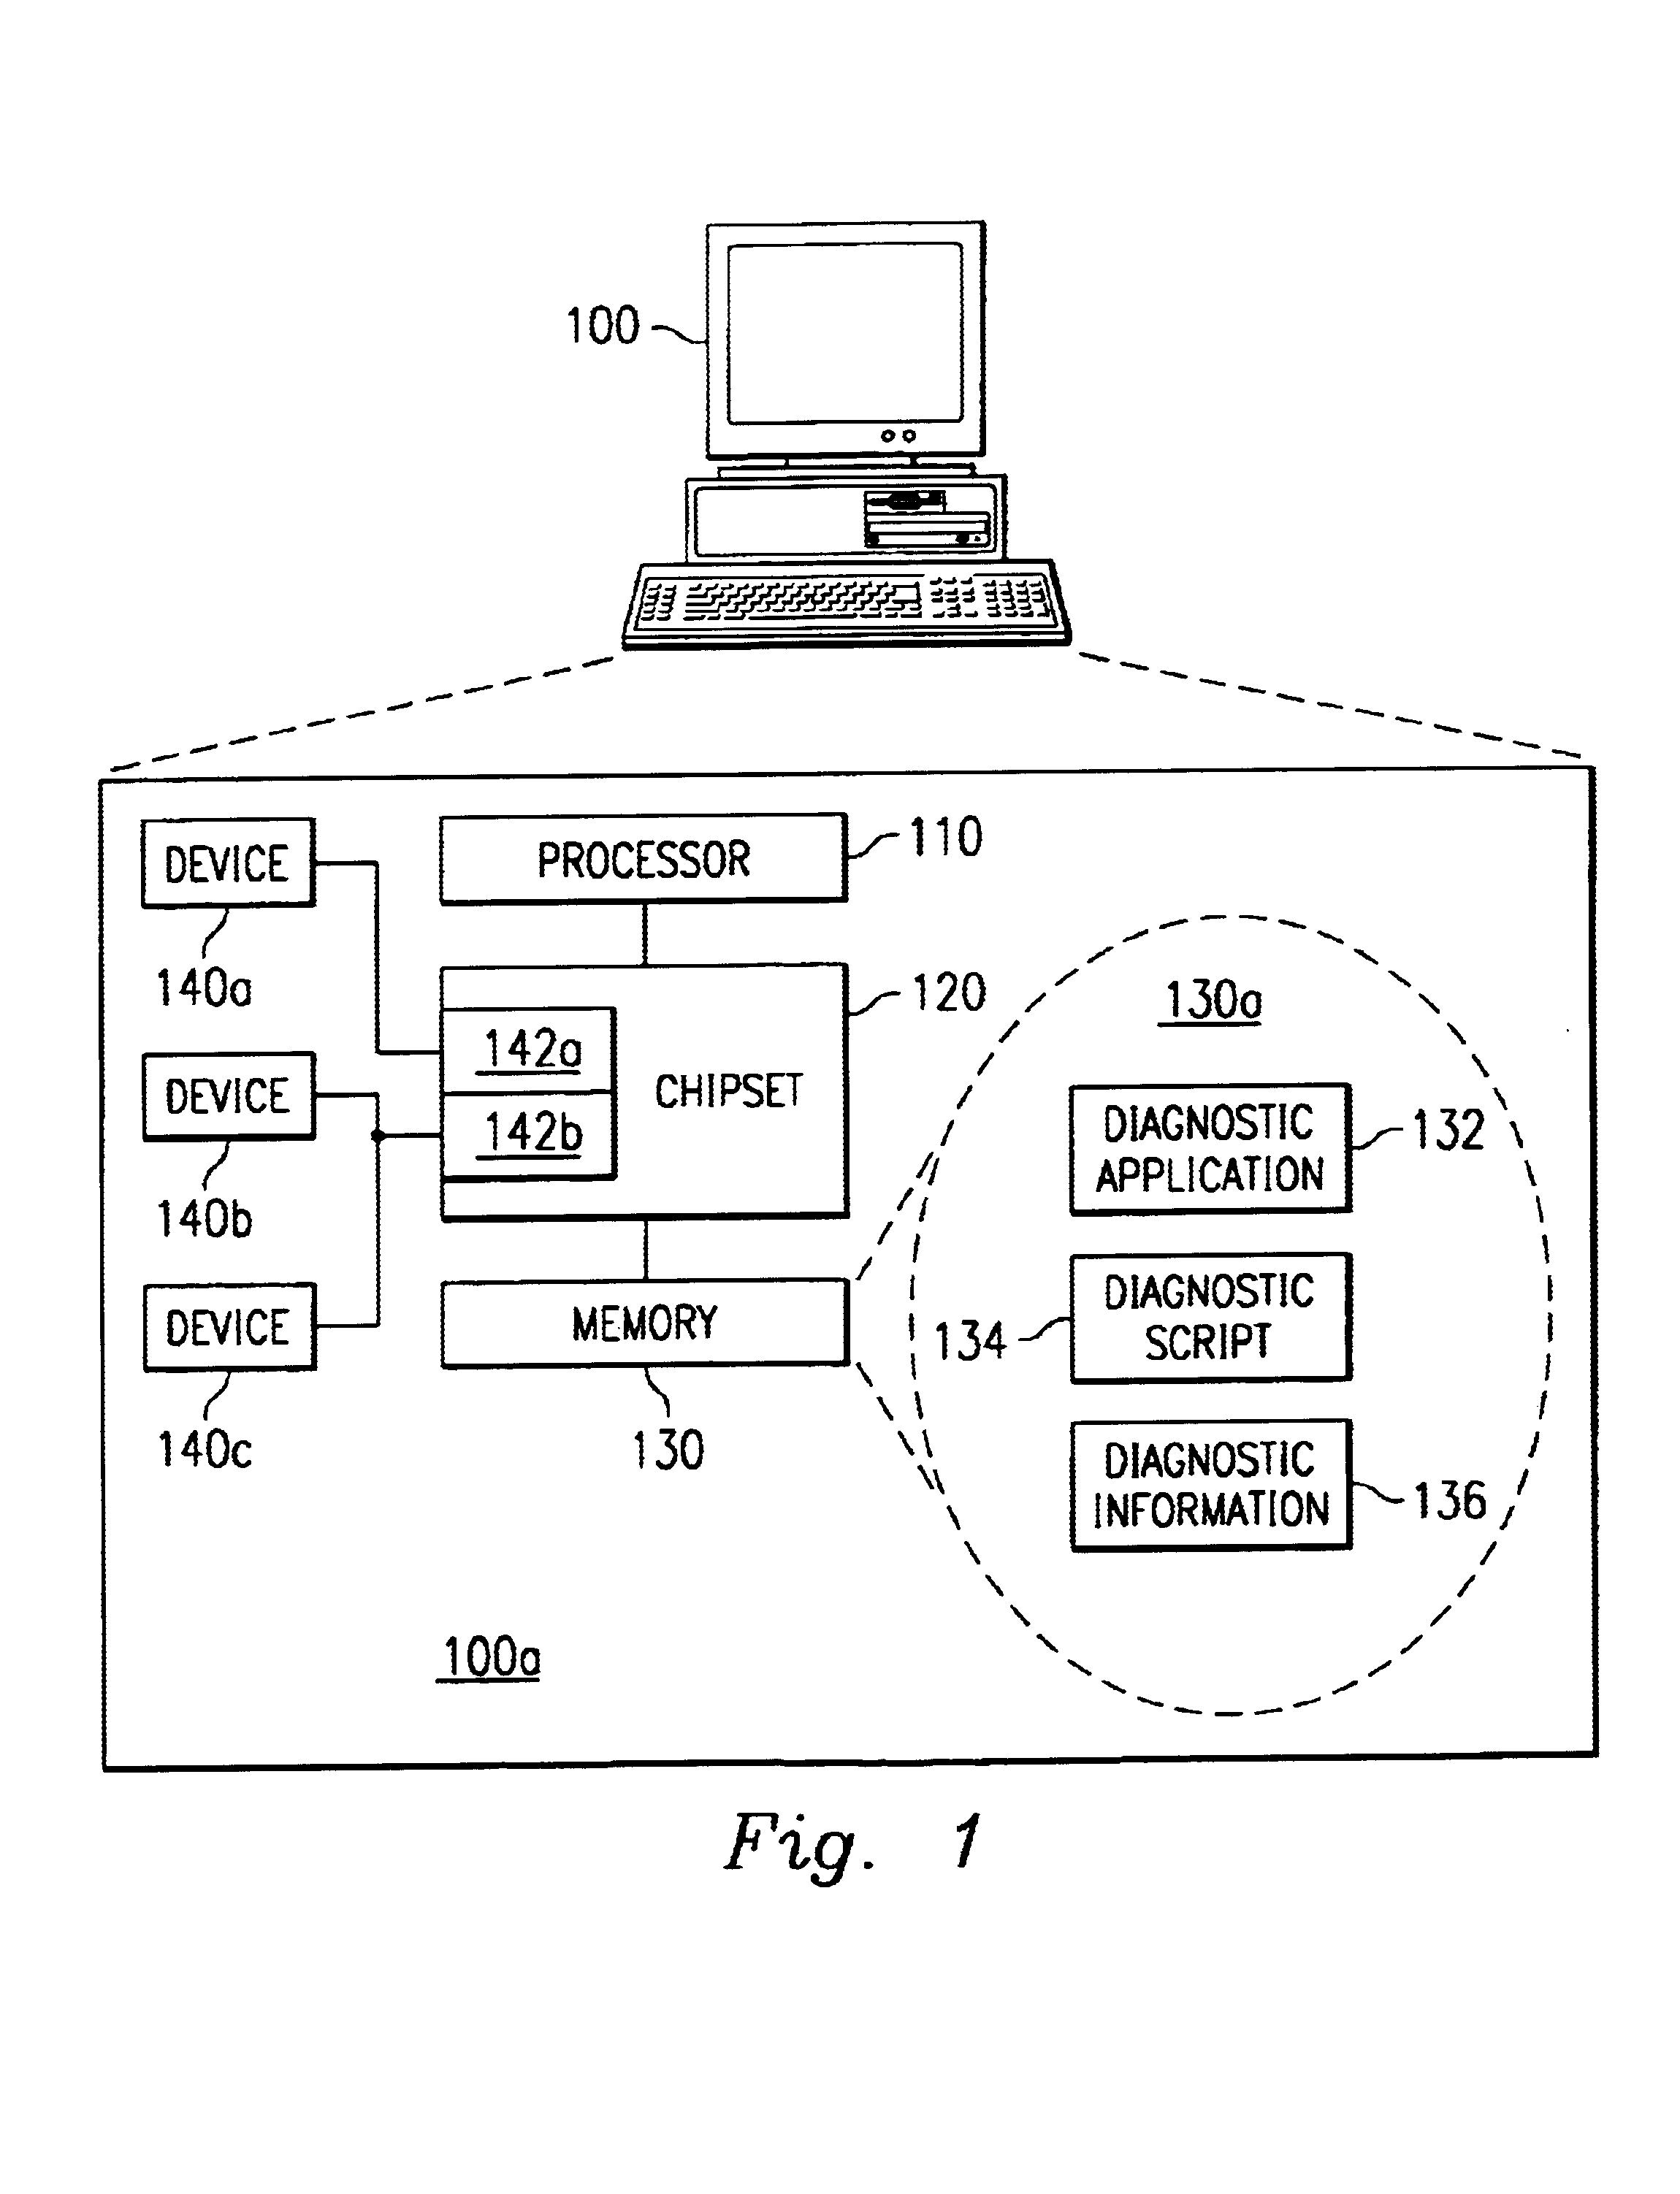 System and method for identifying executable diagnostic routines using machine information and diagnostic information in a computer system